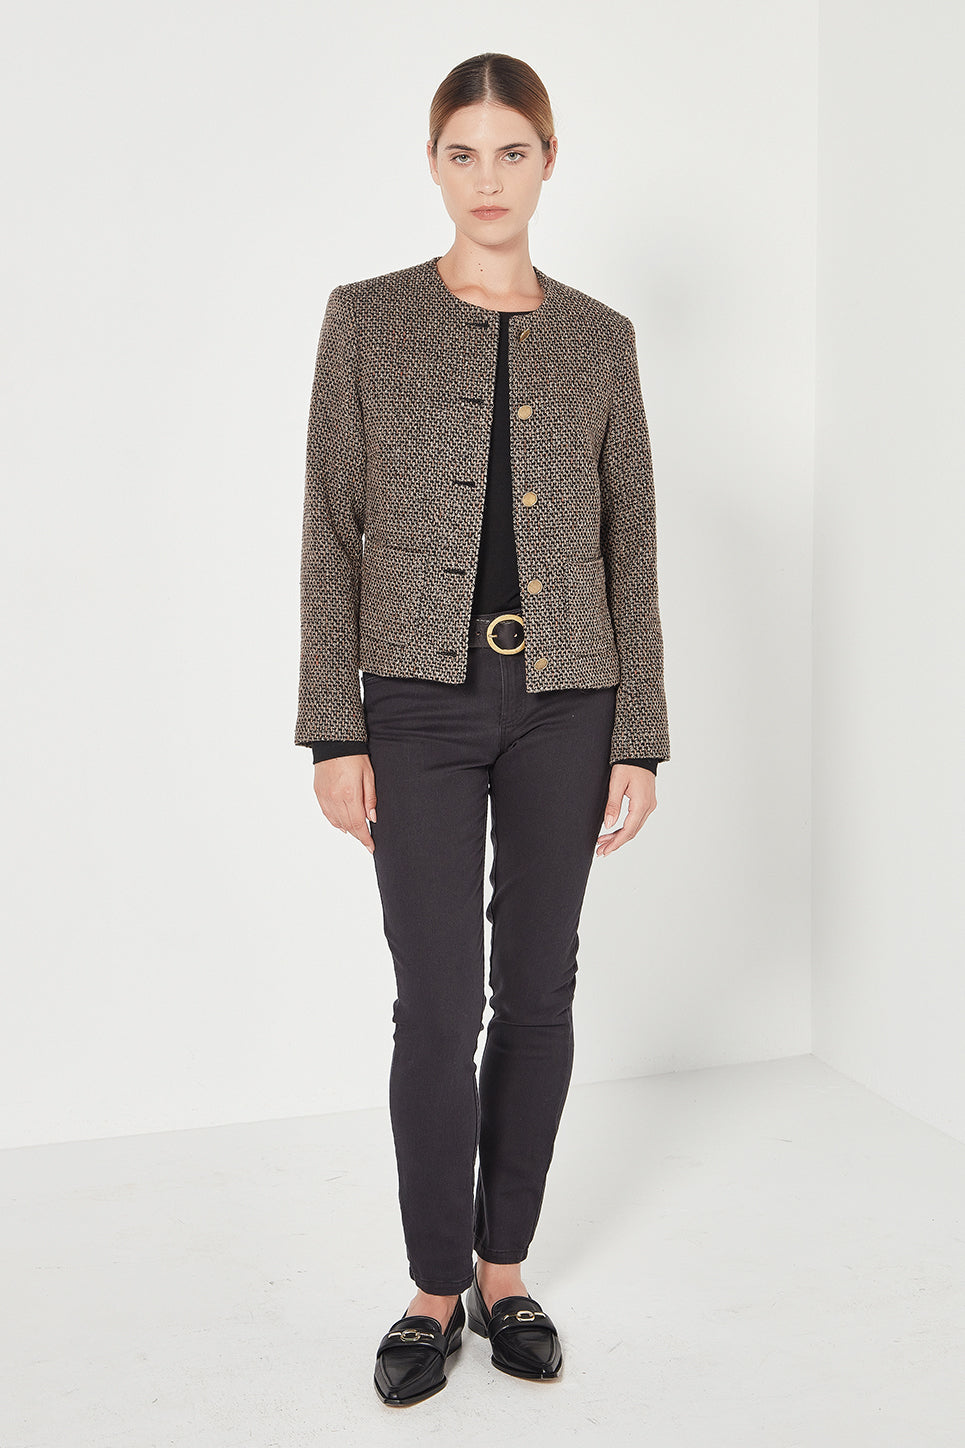 The Gabrielle Jacket in Black/Russet